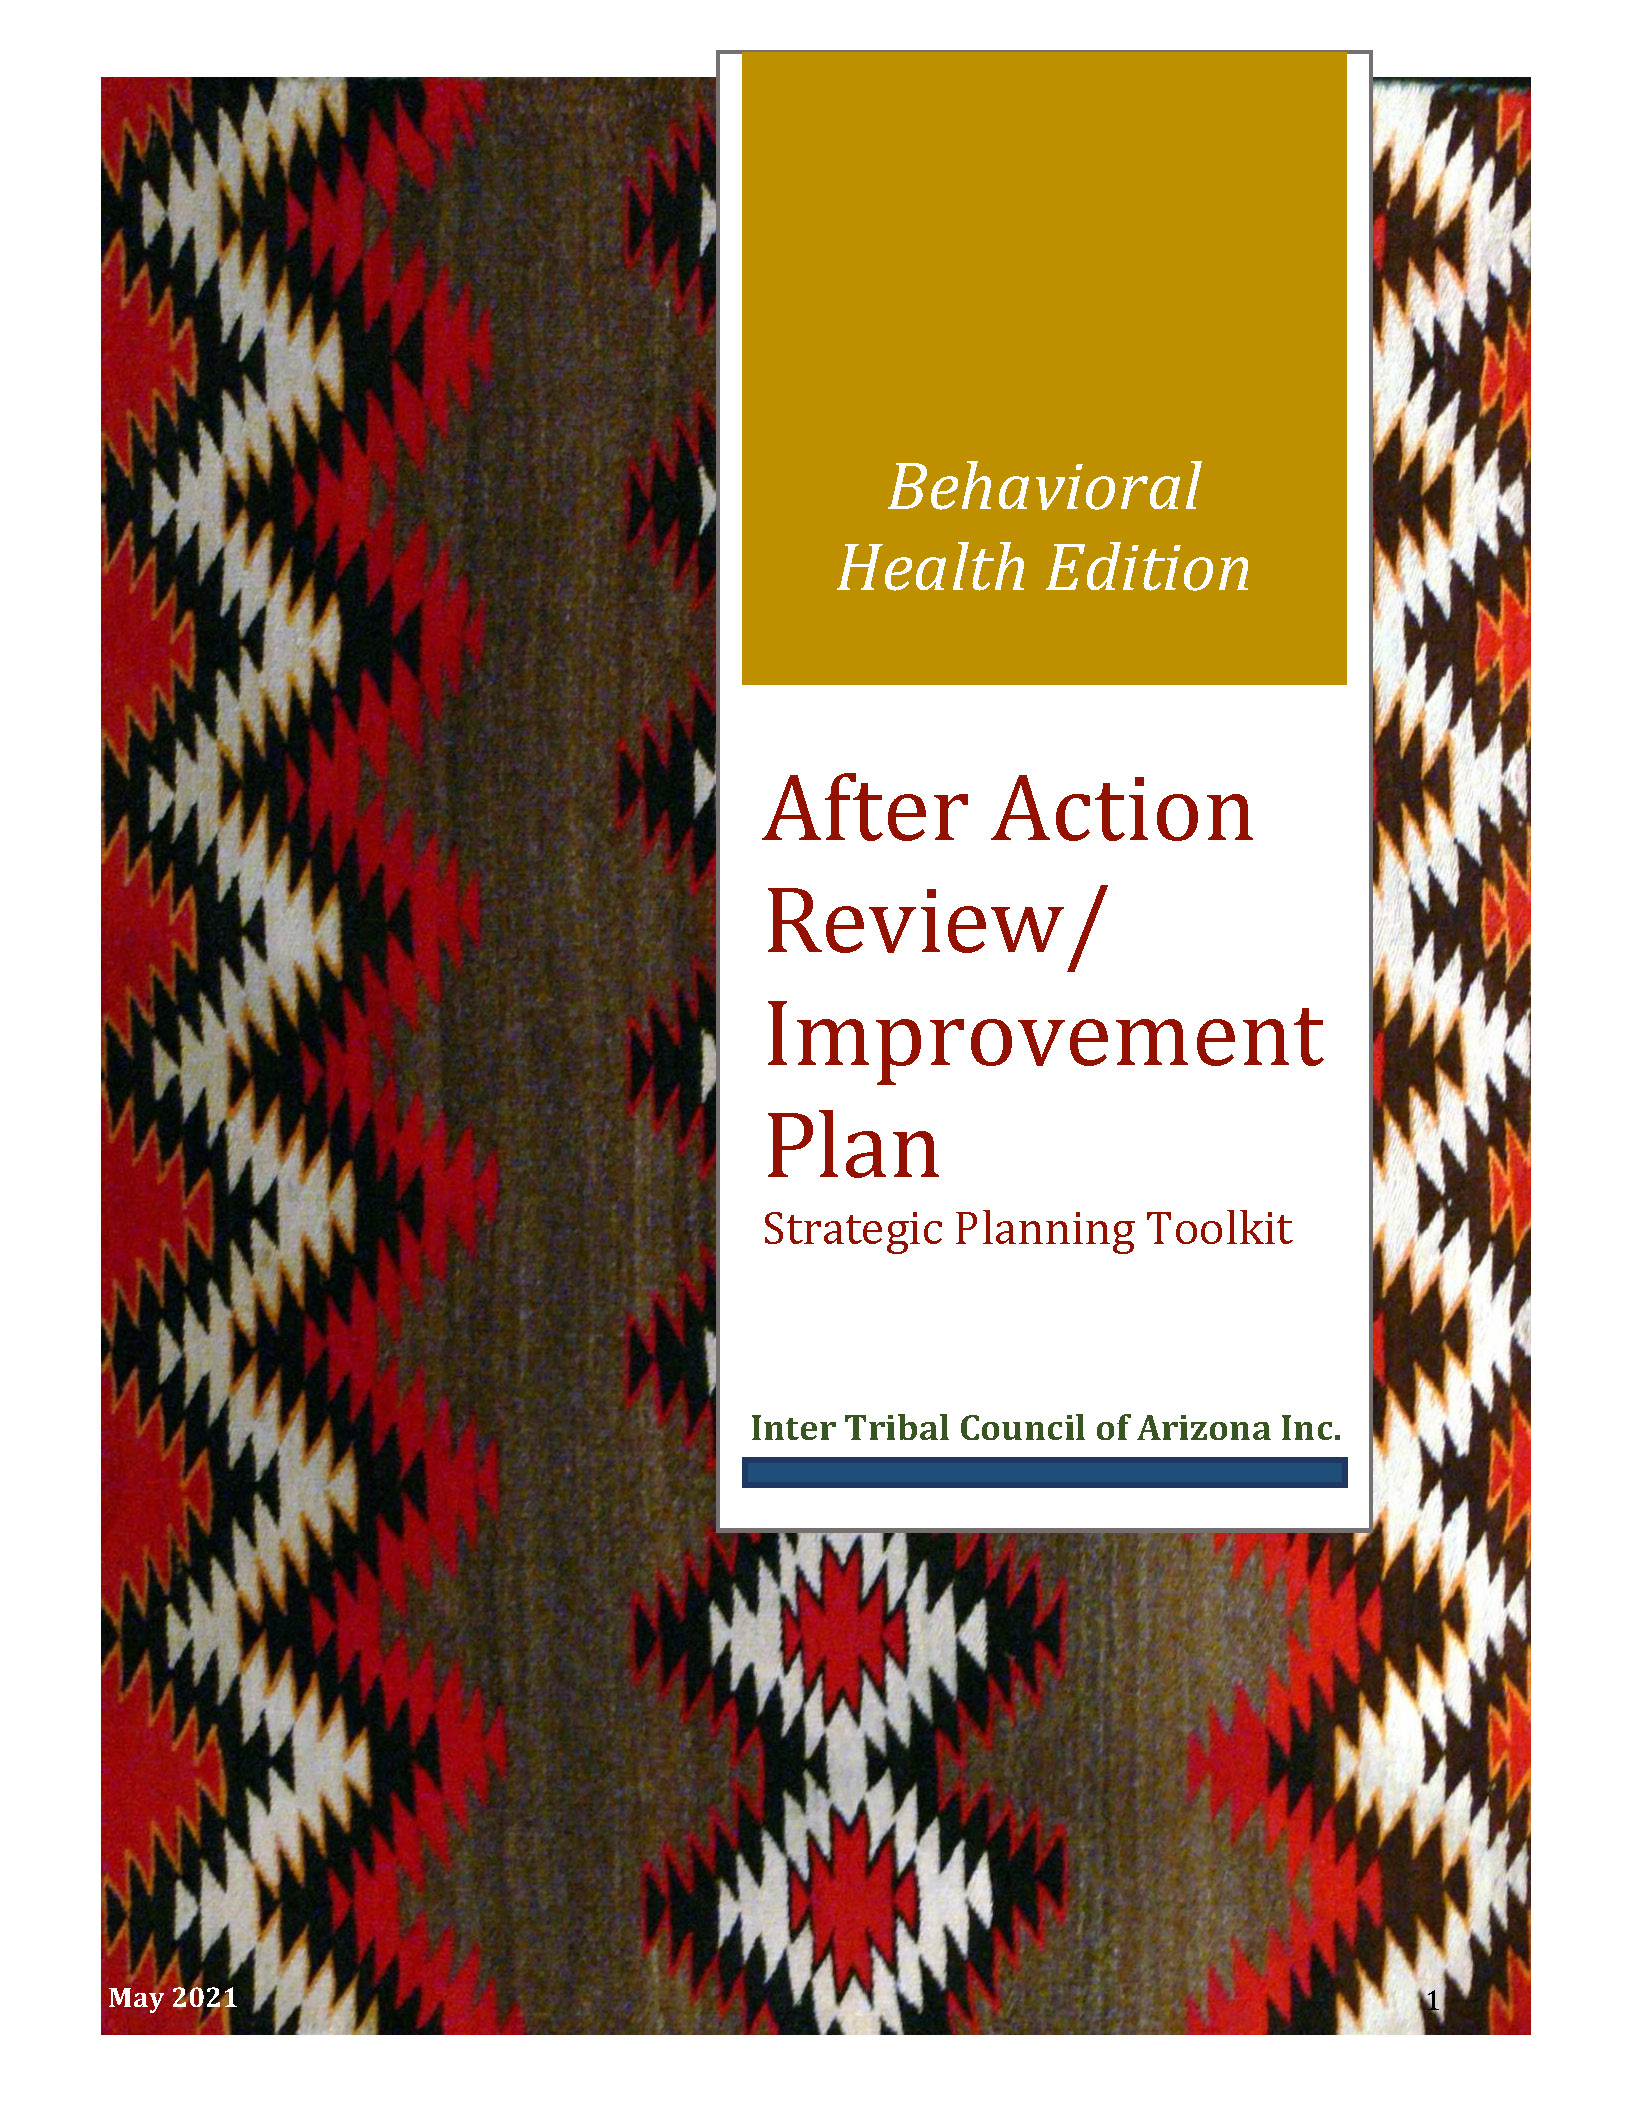 After Action Review (AAR) Toolkit - Behavioral Health Edition